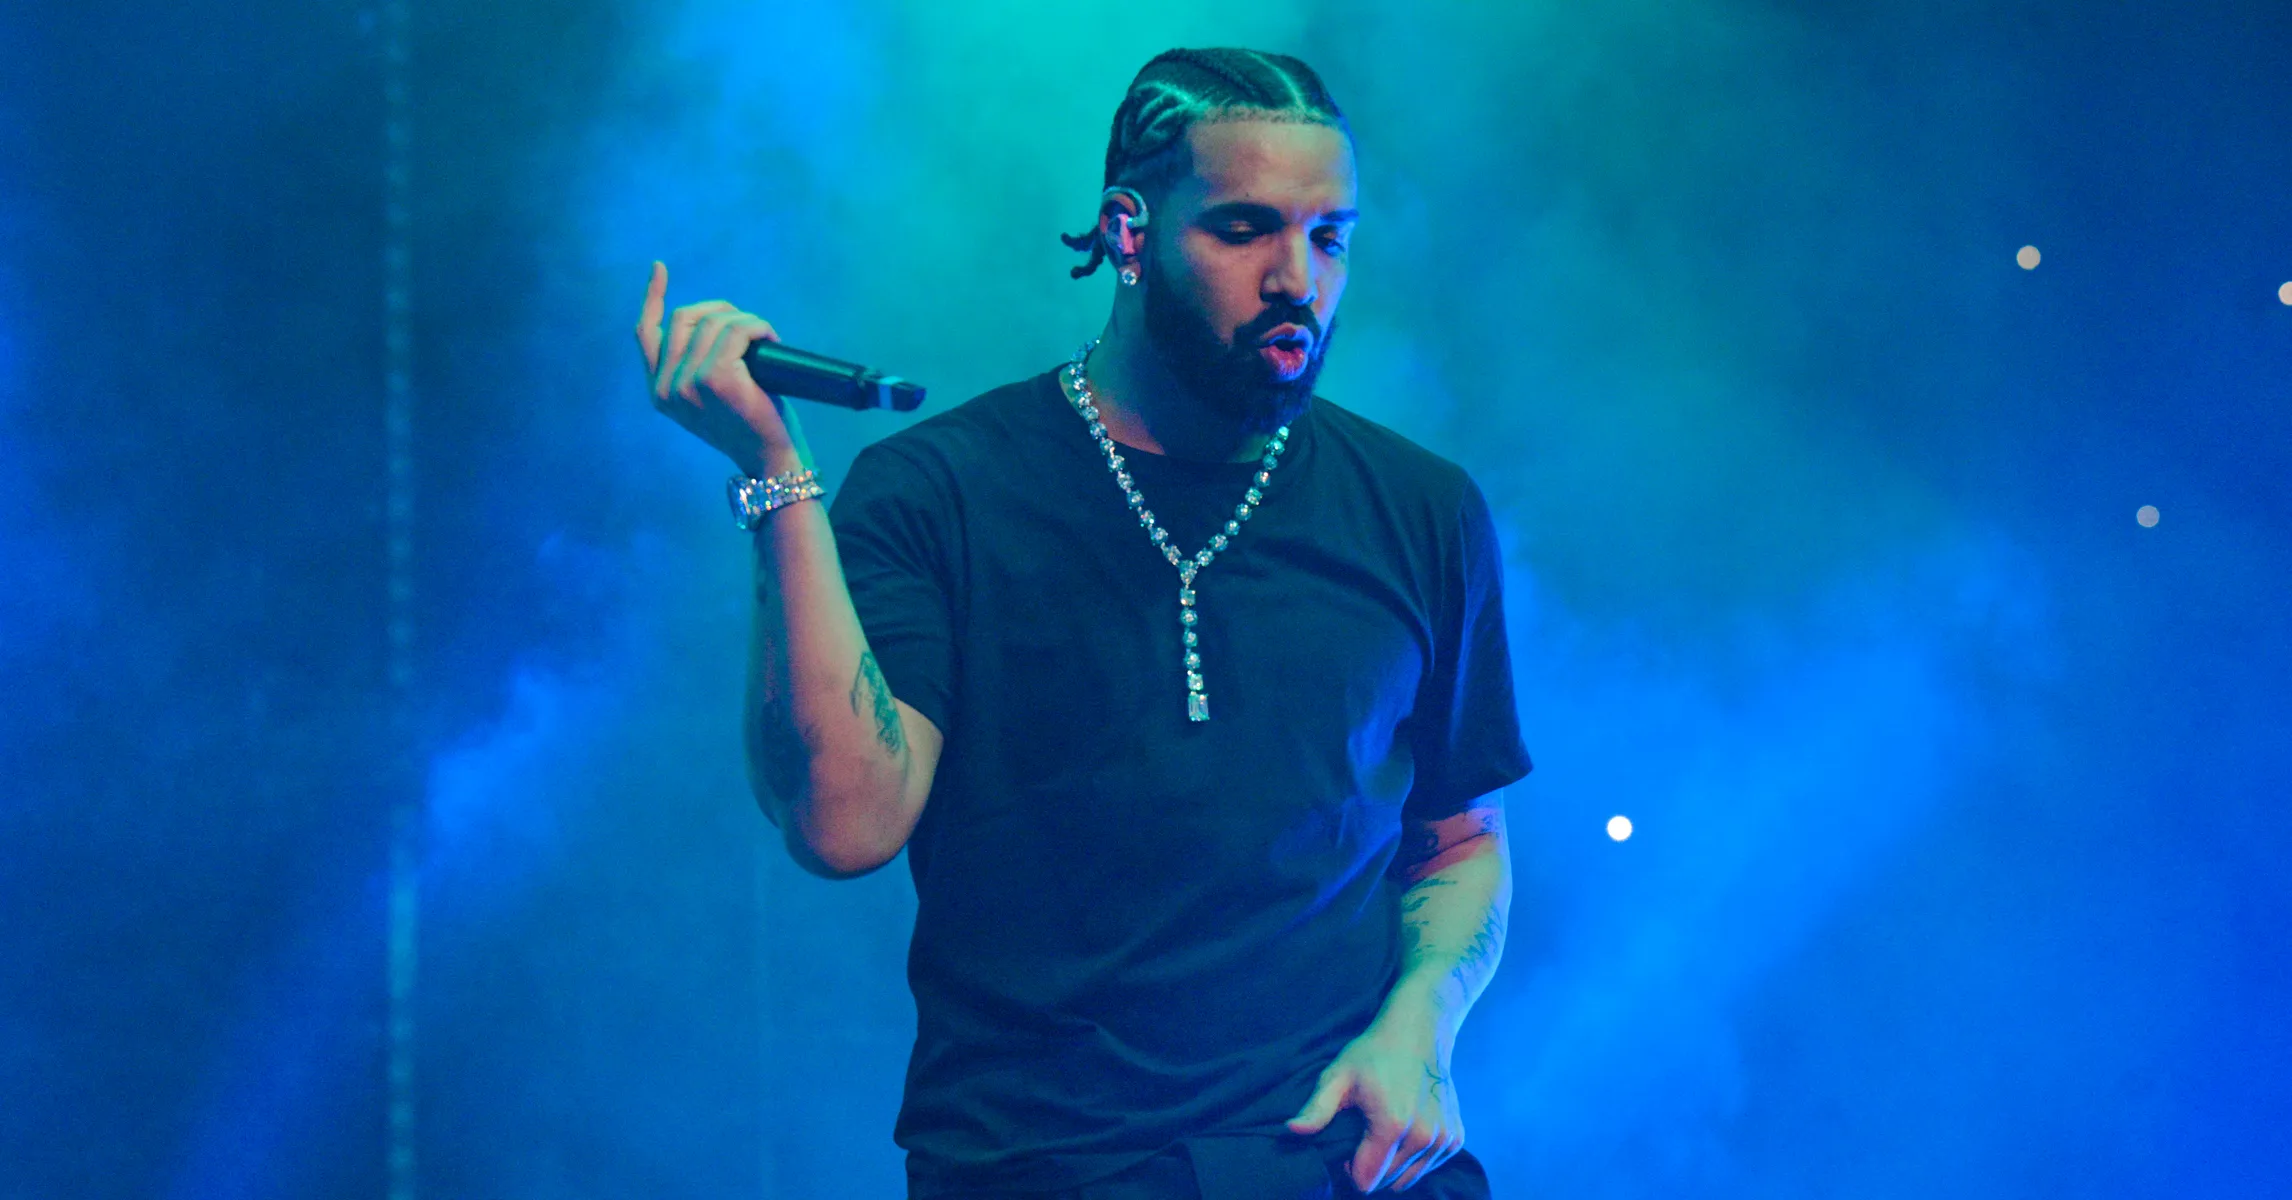 Drake gives his fans back “what they love about me,” reveals DJ Akademiks